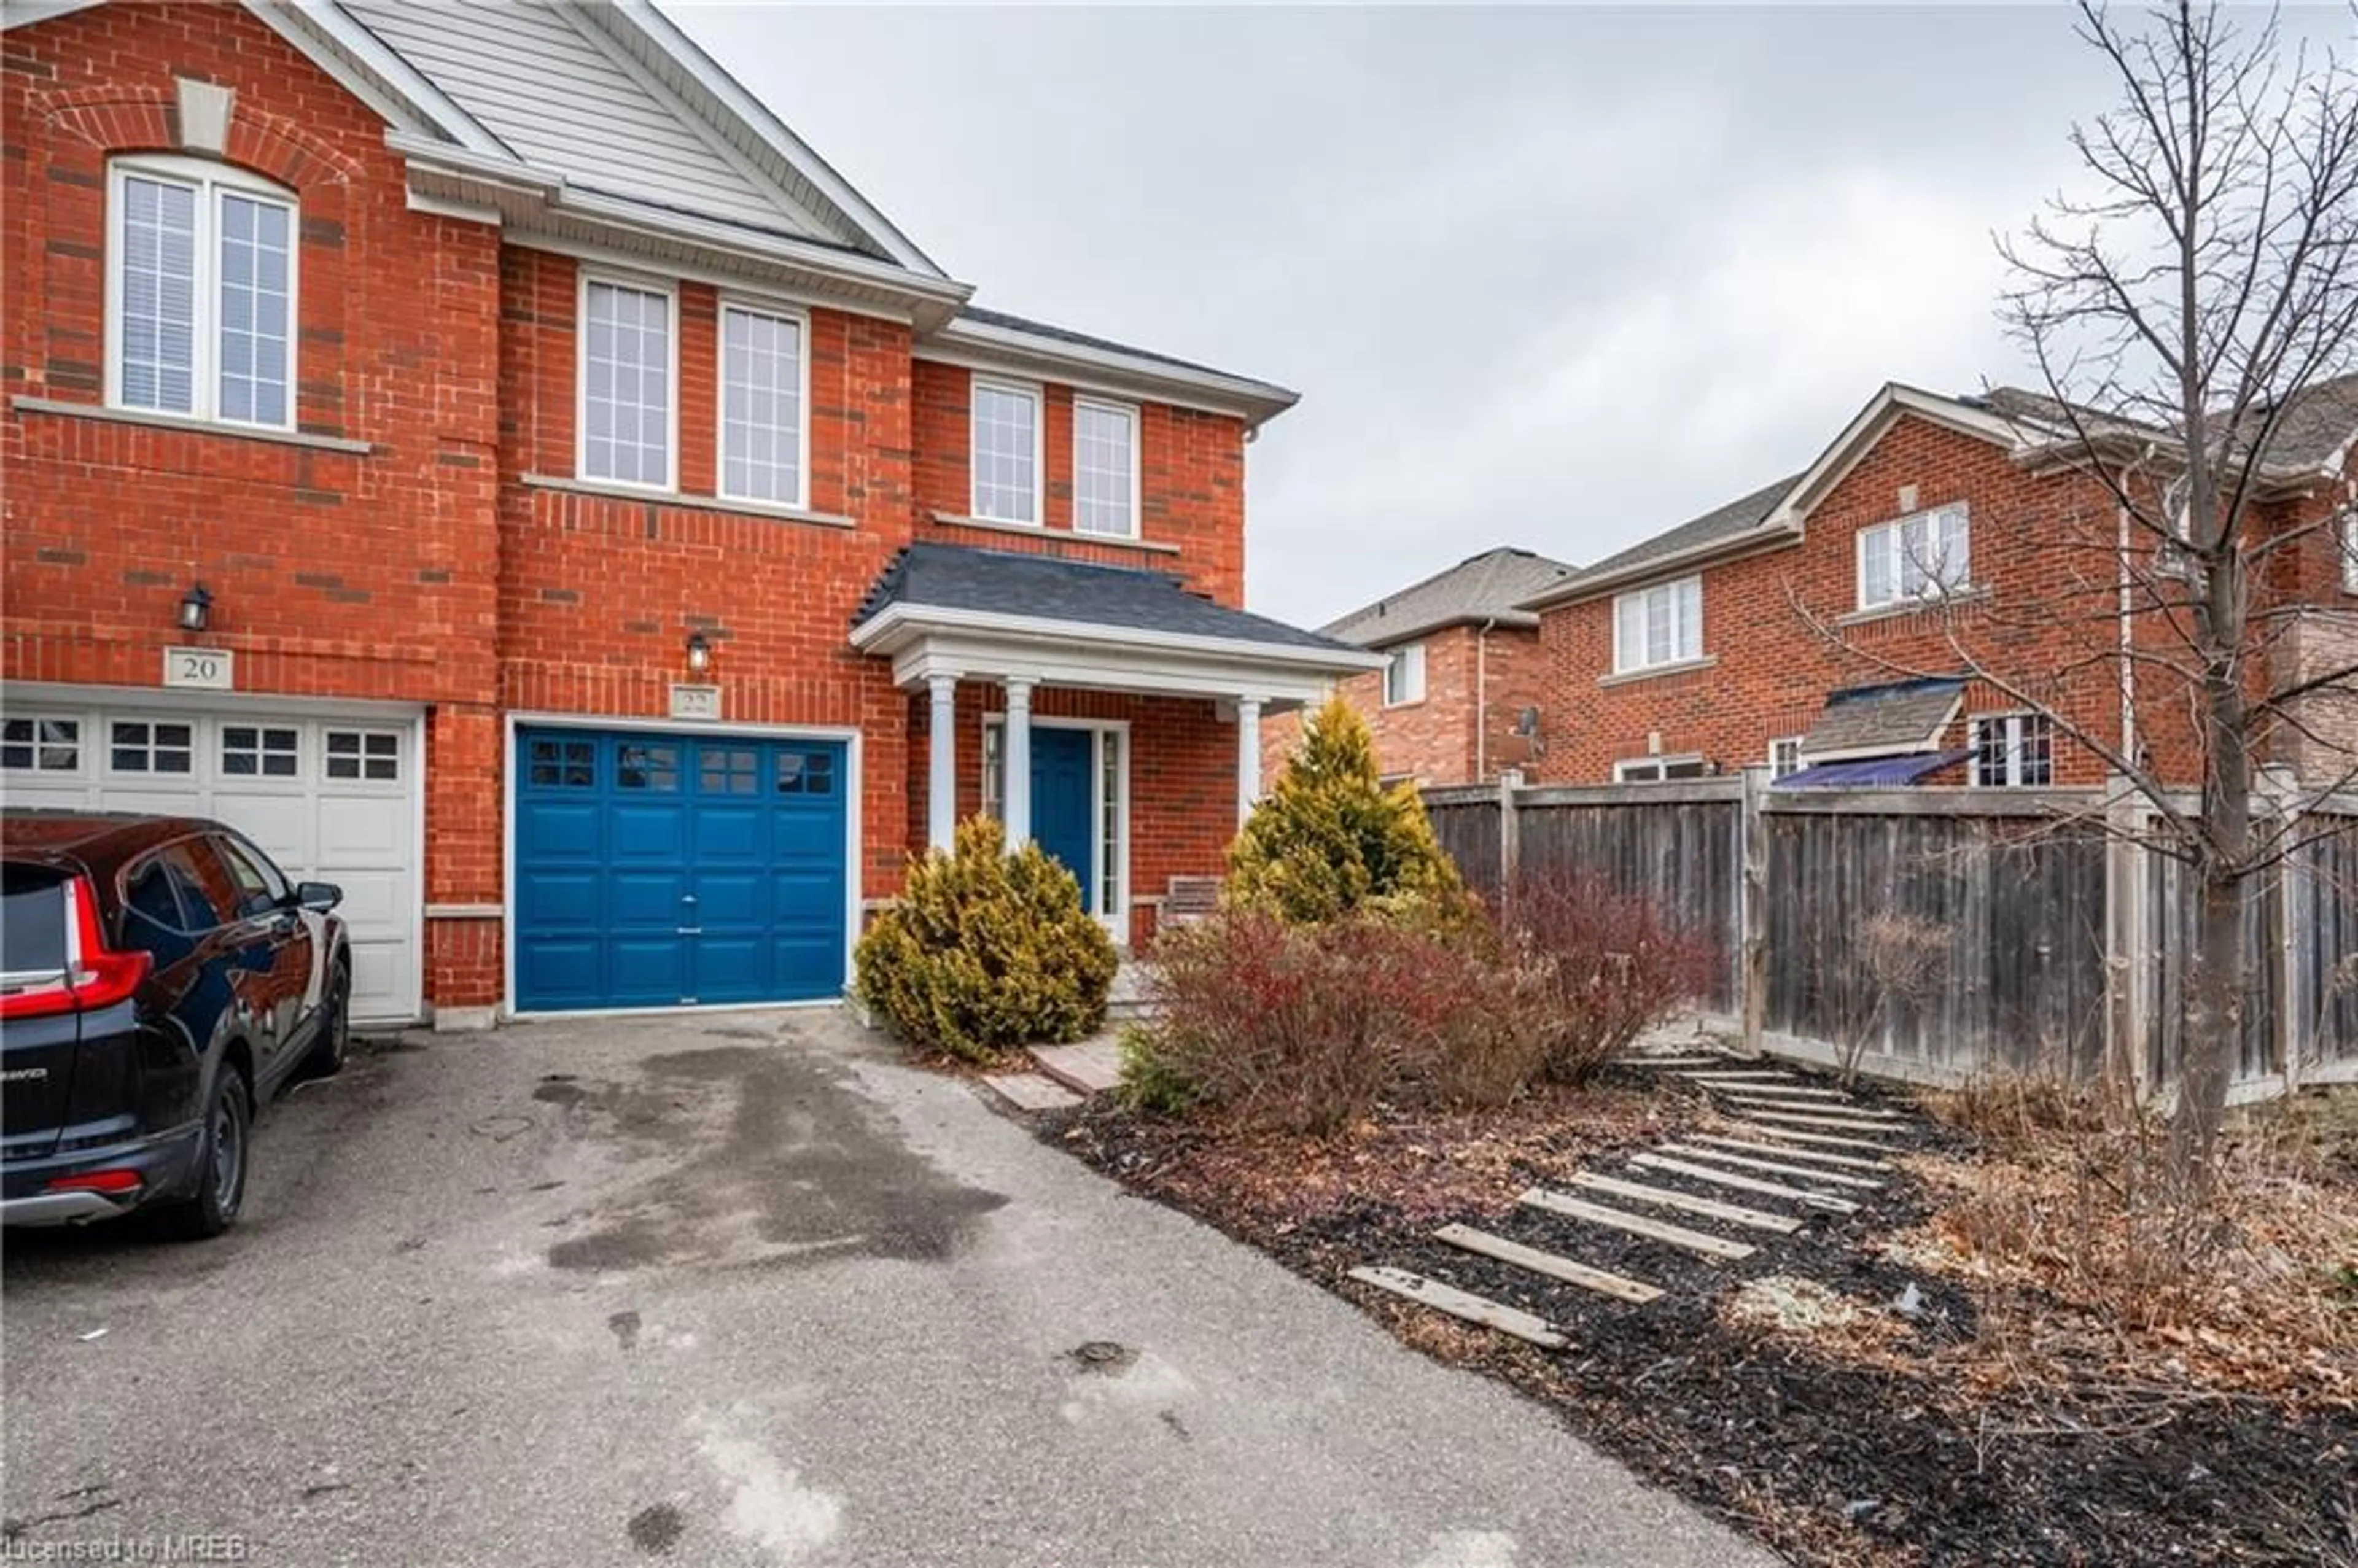 Home with brick exterior material for 22 Albery Rd, Brampton Ontario L7A 0K7